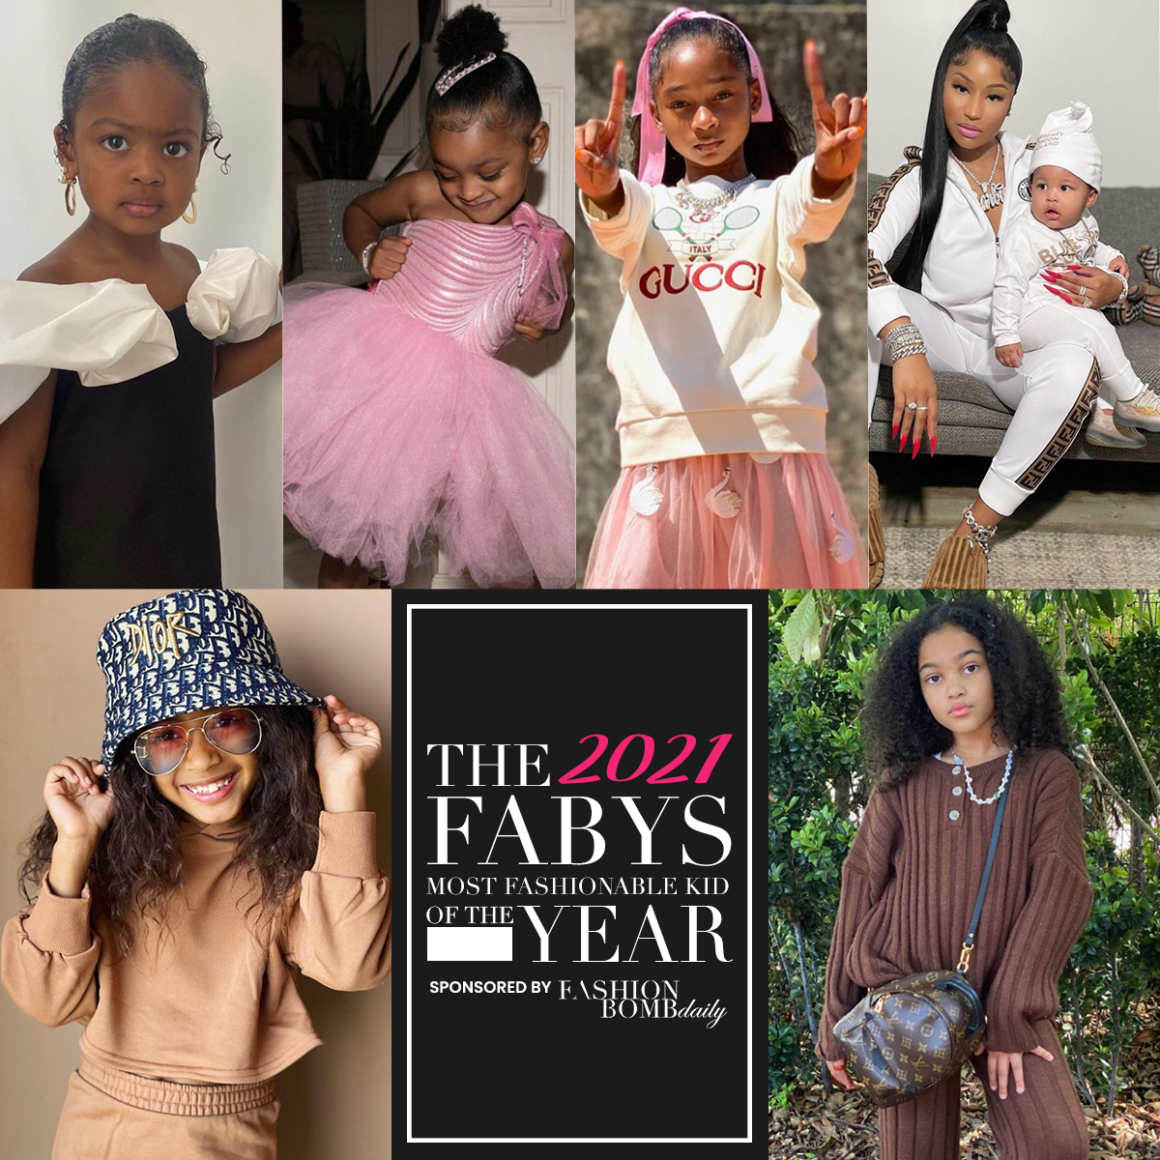 The Fabys Best of 2021 Most Fashionable Kid Featuring Lay Lay Kaavia James Kulture More7